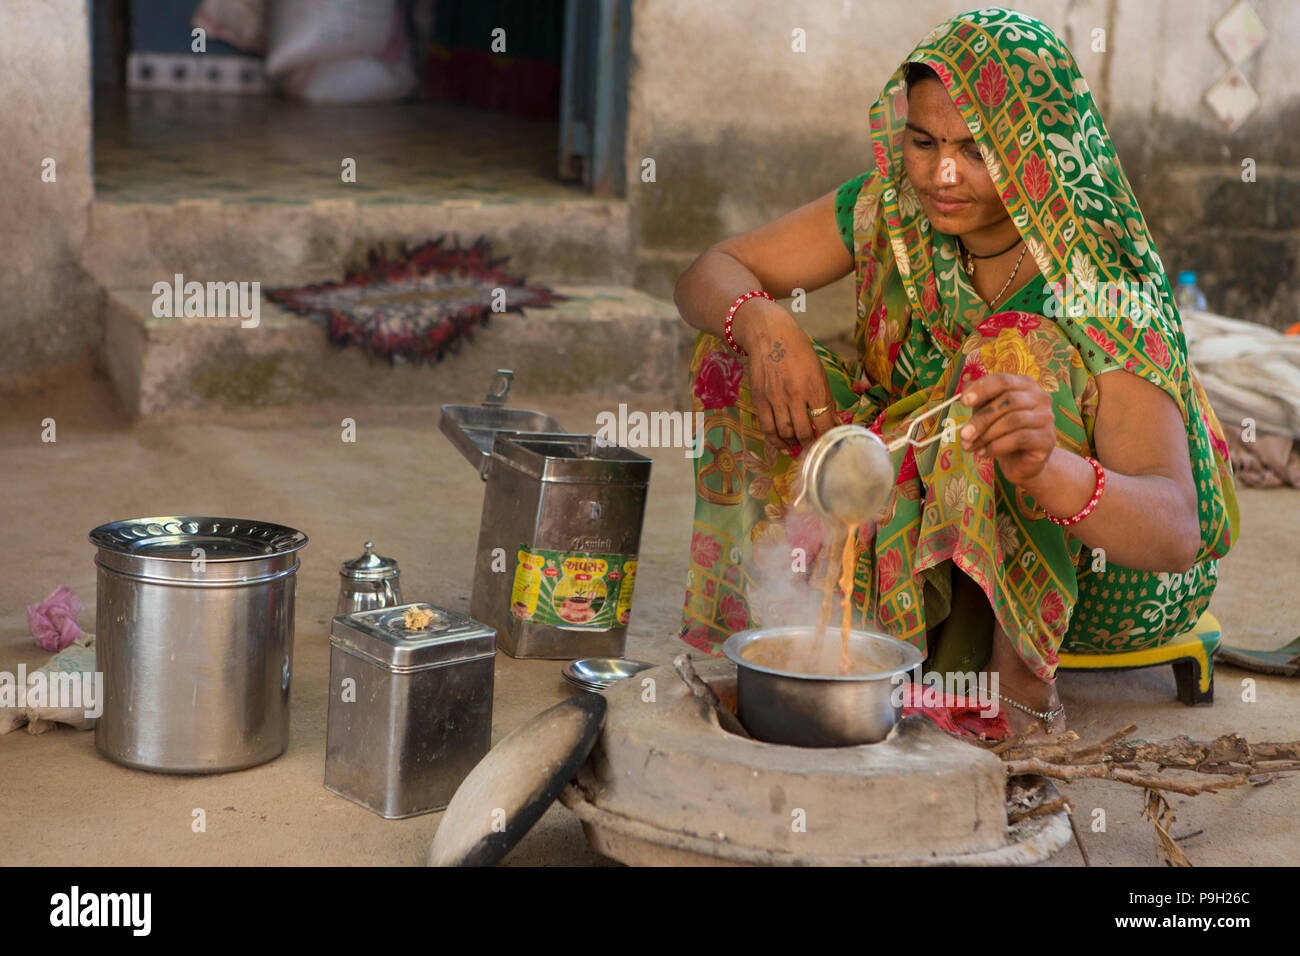 A woman making Indian chai on an open wood fire at their home in Ahmedabad, India. Stock Photo